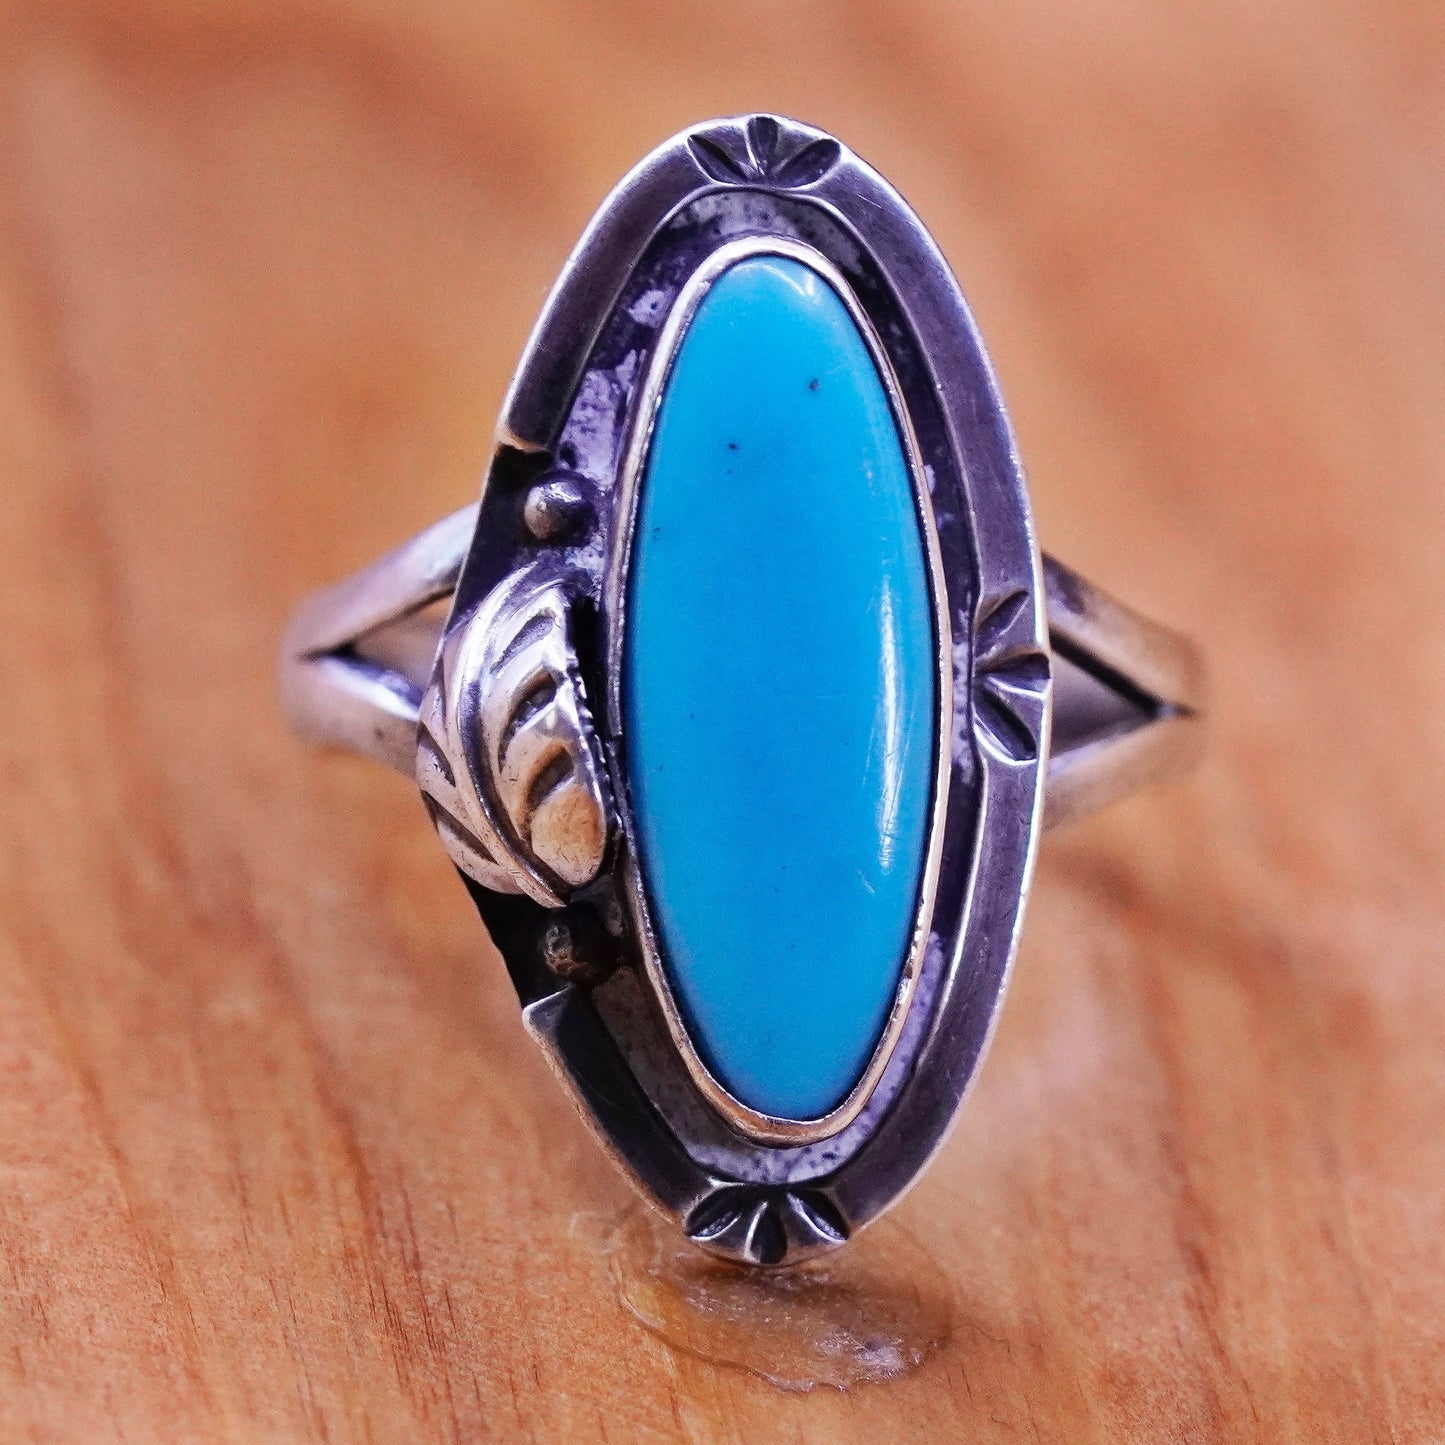 Size 9, vtg Sterling silver handmade ring, jewelry, southwestern 925 turquoise